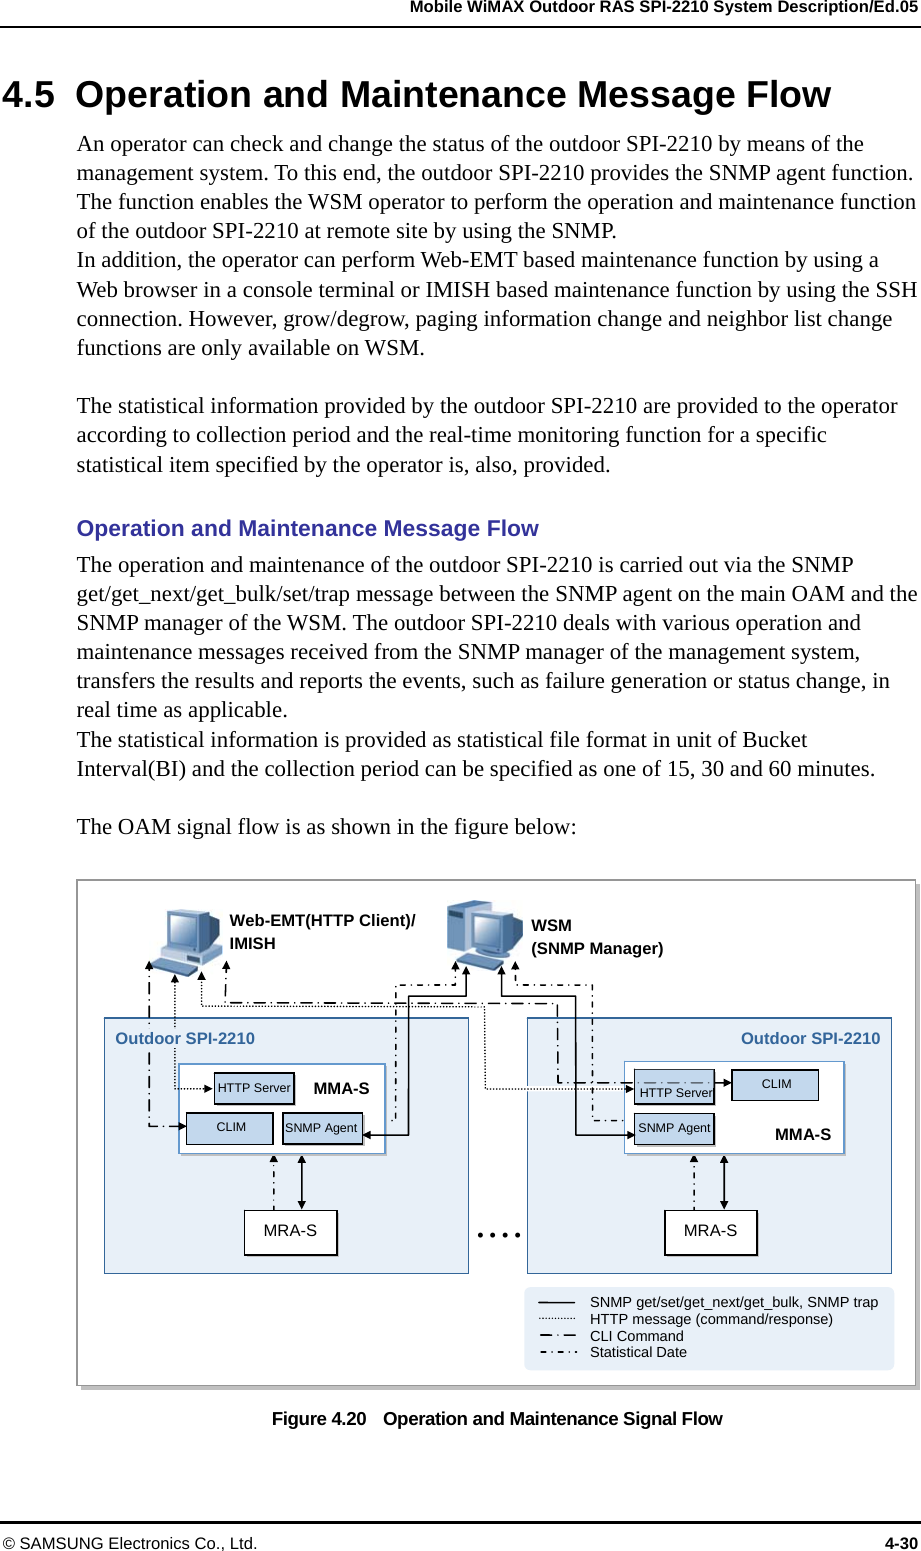   Mobile WiMAX Outdoor RAS SPI-2210 System Description/Ed.05 © SAMSUNG Electronics Co., Ltd.  4-30 4.5  Operation and Maintenance Message Flow An operator can check and change the status of the outdoor SPI-2210 by means of the management system. To this end, the outdoor SPI-2210 provides the SNMP agent function. The function enables the WSM operator to perform the operation and maintenance function of the outdoor SPI-2210 at remote site by using the SNMP.   In addition, the operator can perform Web-EMT based maintenance function by using a Web browser in a console terminal or IMISH based maintenance function by using the SSH connection. However, grow/degrow, paging information change and neighbor list change functions are only available on WSM.    The statistical information provided by the outdoor SPI-2210 are provided to the operator according to collection period and the real-time monitoring function for a specific statistical item specified by the operator is, also, provided.  Operation and Maintenance Message Flow The operation and maintenance of the outdoor SPI-2210 is carried out via the SNMP get/get_next/get_bulk/set/trap message between the SNMP agent on the main OAM and the SNMP manager of the WSM. The outdoor SPI-2210 deals with various operation and maintenance messages received from the SNMP manager of the management system, transfers the results and reports the events, such as failure generation or status change, in real time as applicable. The statistical information is provided as statistical file format in unit of Bucket Interval(BI) and the collection period can be specified as one of 15, 30 and 60 minutes.  The OAM signal flow is as shown in the figure below:  Figure 4.20    Operation and Maintenance Signal Flow  • • • •WSM (SNMP Manager) Web-EMT(HTTP Client)/ IMISH MRA-S Outdoor SPI-2210MRA-S MMA-SHTTP Server SNMP Agent  MMA-S SNMP AgentCLIM CLIM HTTP Server         SNMP get/set/get_next/get_bulk, SNMP trap         HTTP message (command/response)         CLI Command         Statistical Date Outdoor SPI-2210 